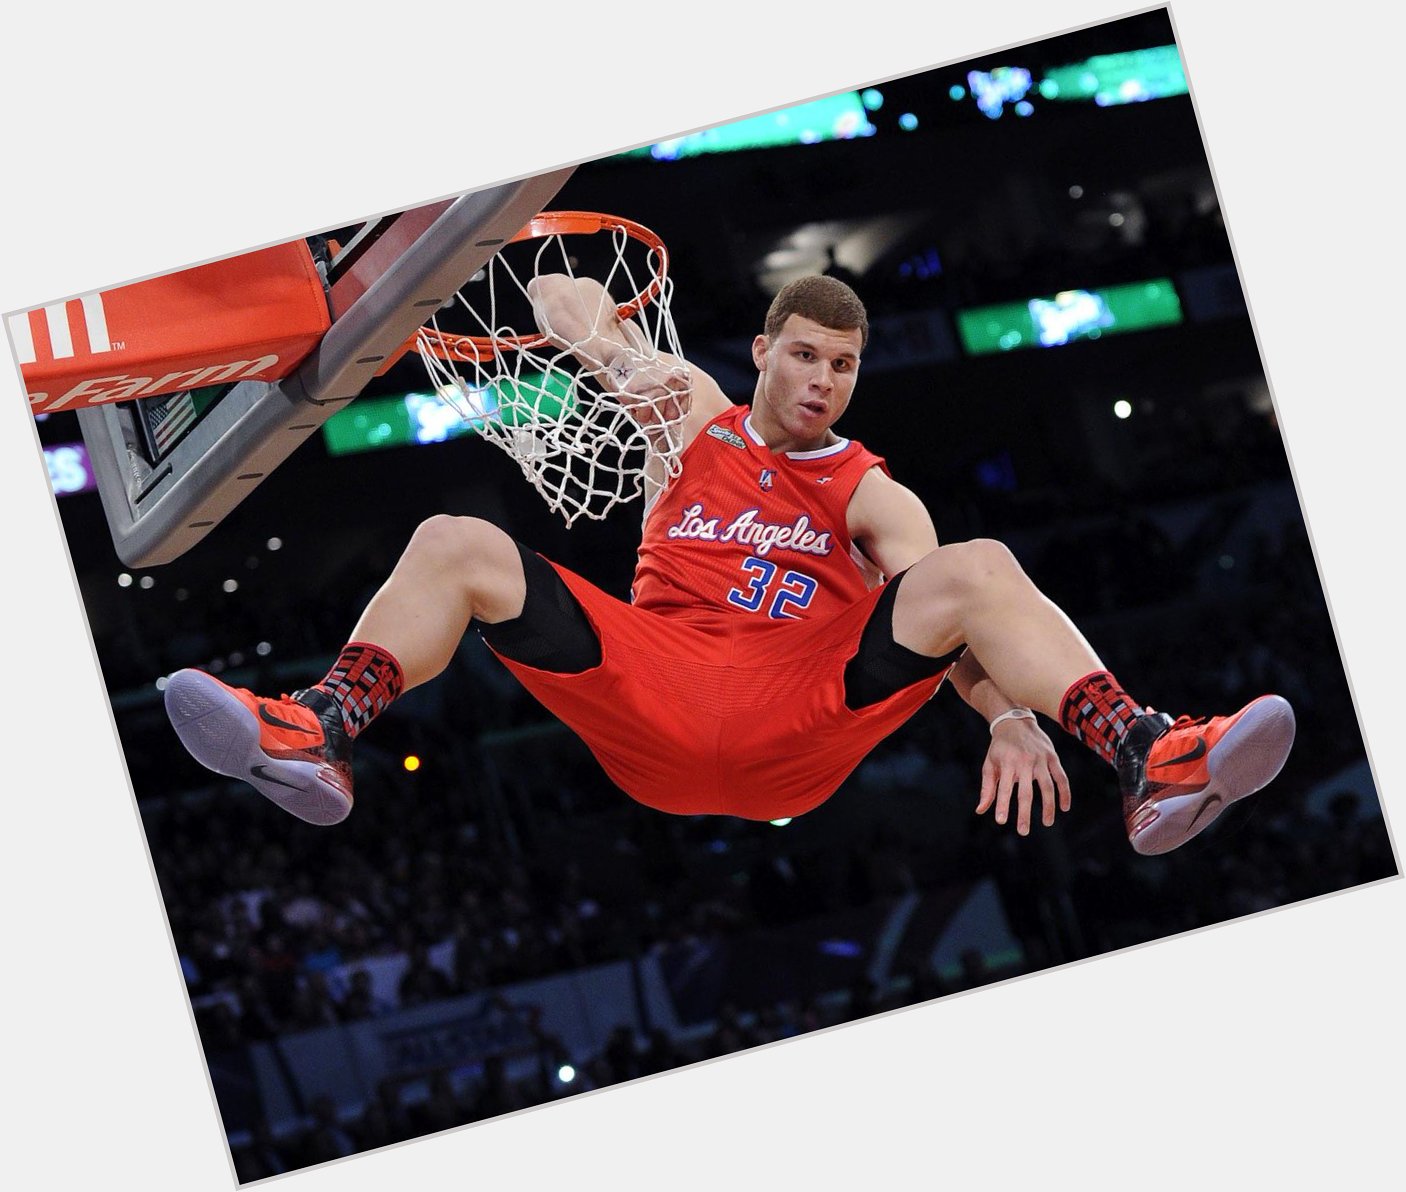 Happy Birthday to Blake Griffin, who turns 26 today! 